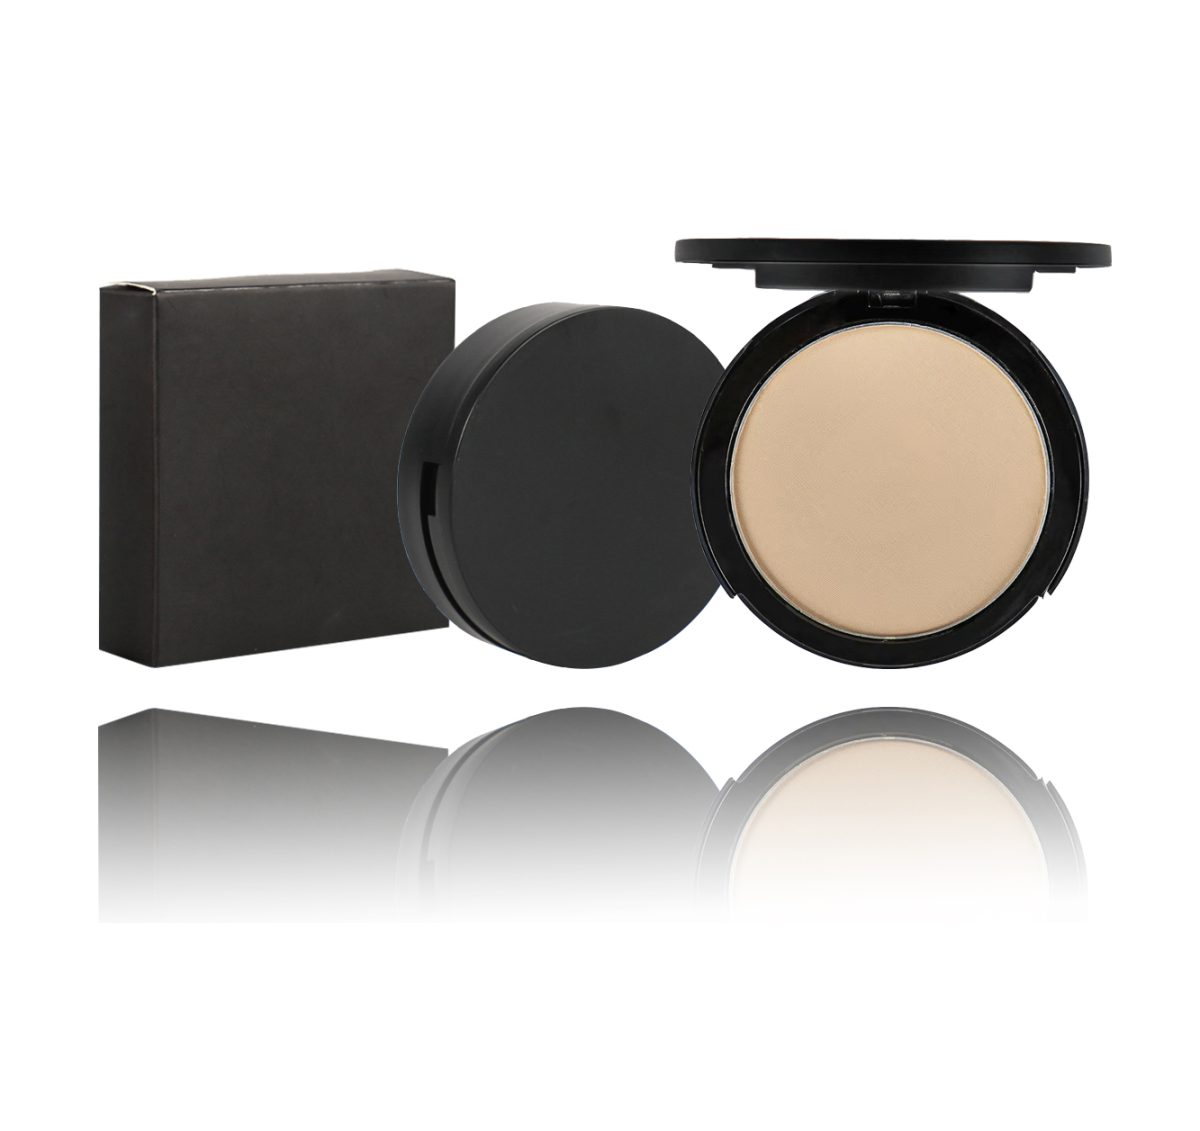 Build Your Own Private Label Compact Face Powder Line with AQ Gimel Cosmetics, Choose from a Large Range of High Quality Cruelty Free White Label Products.